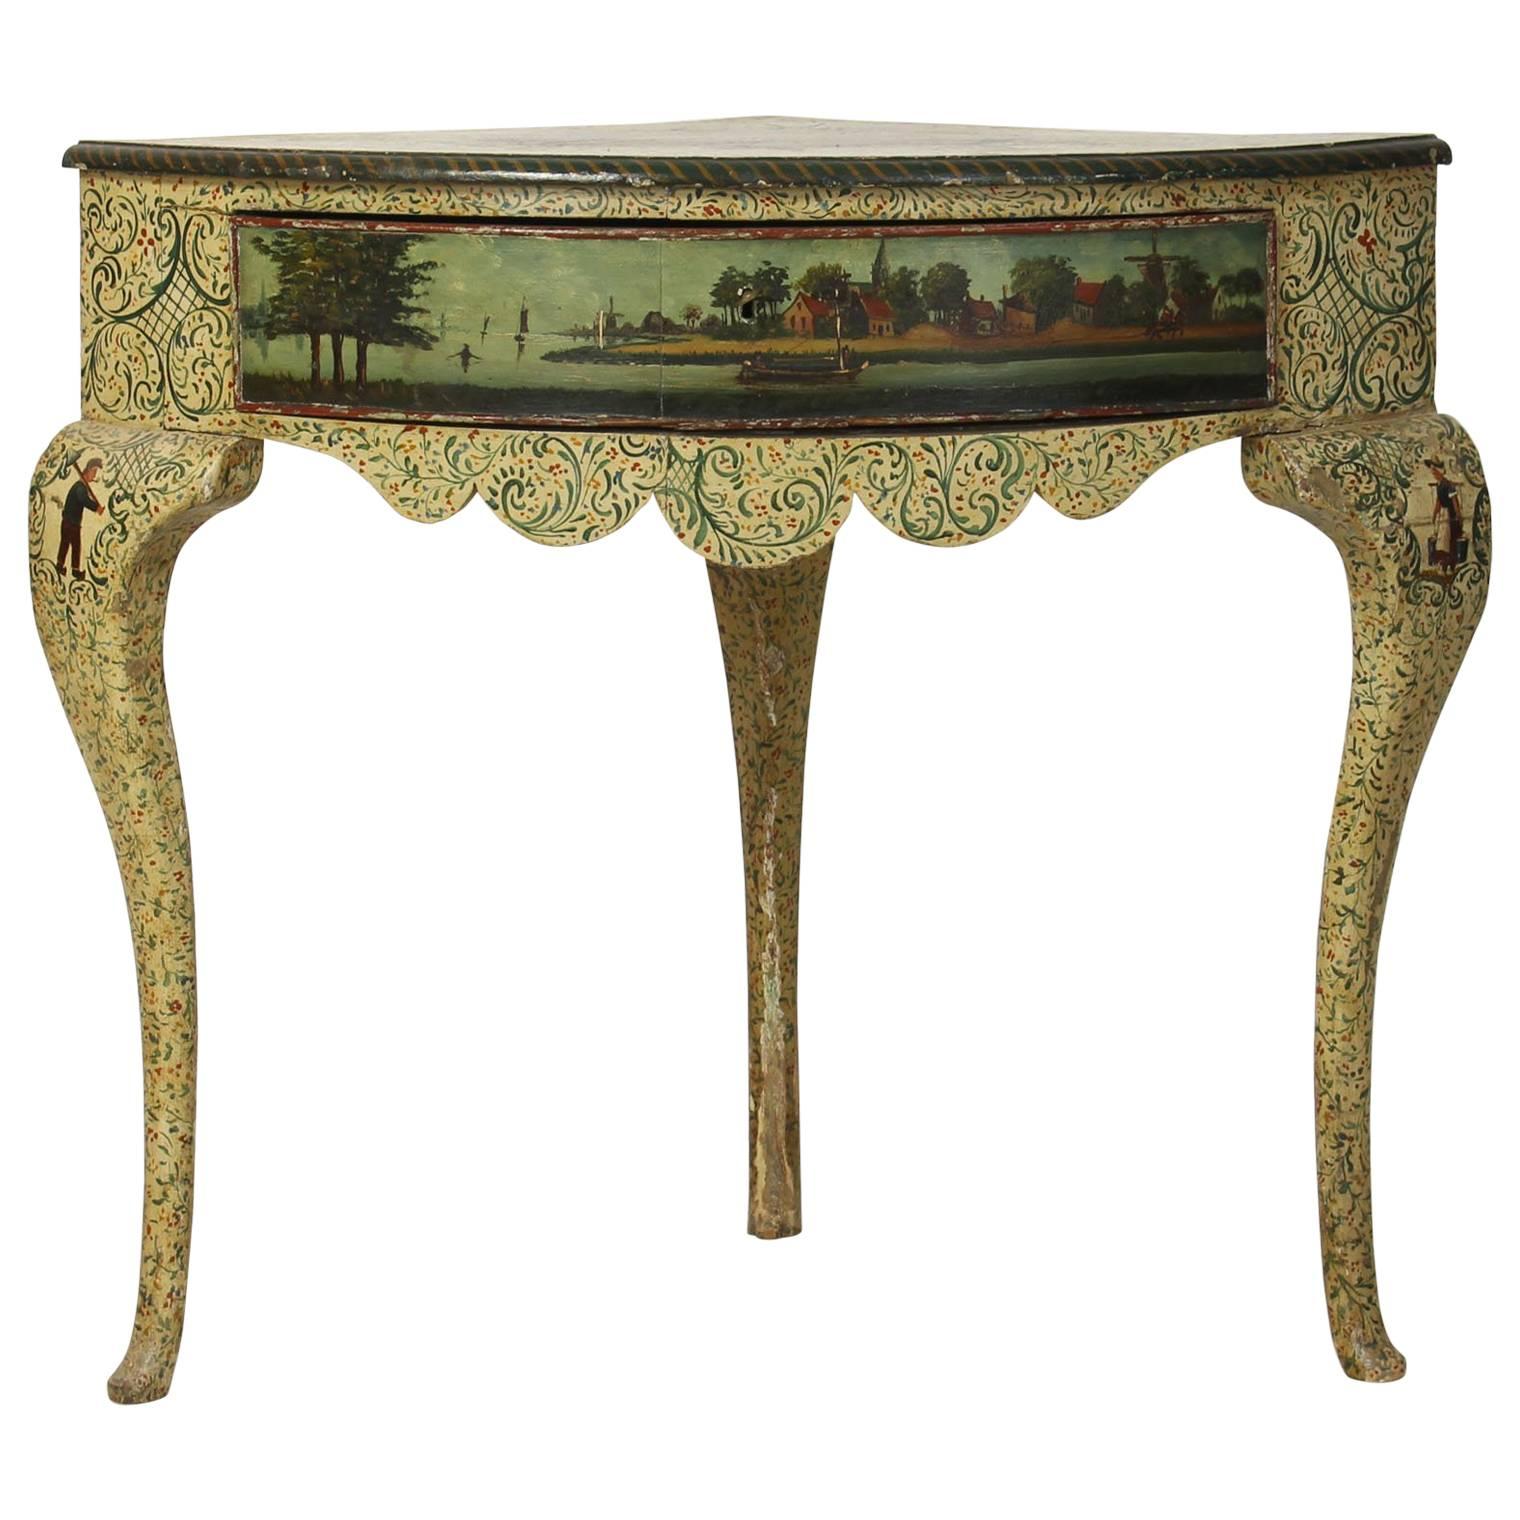 Early 19th Century French Corner Table